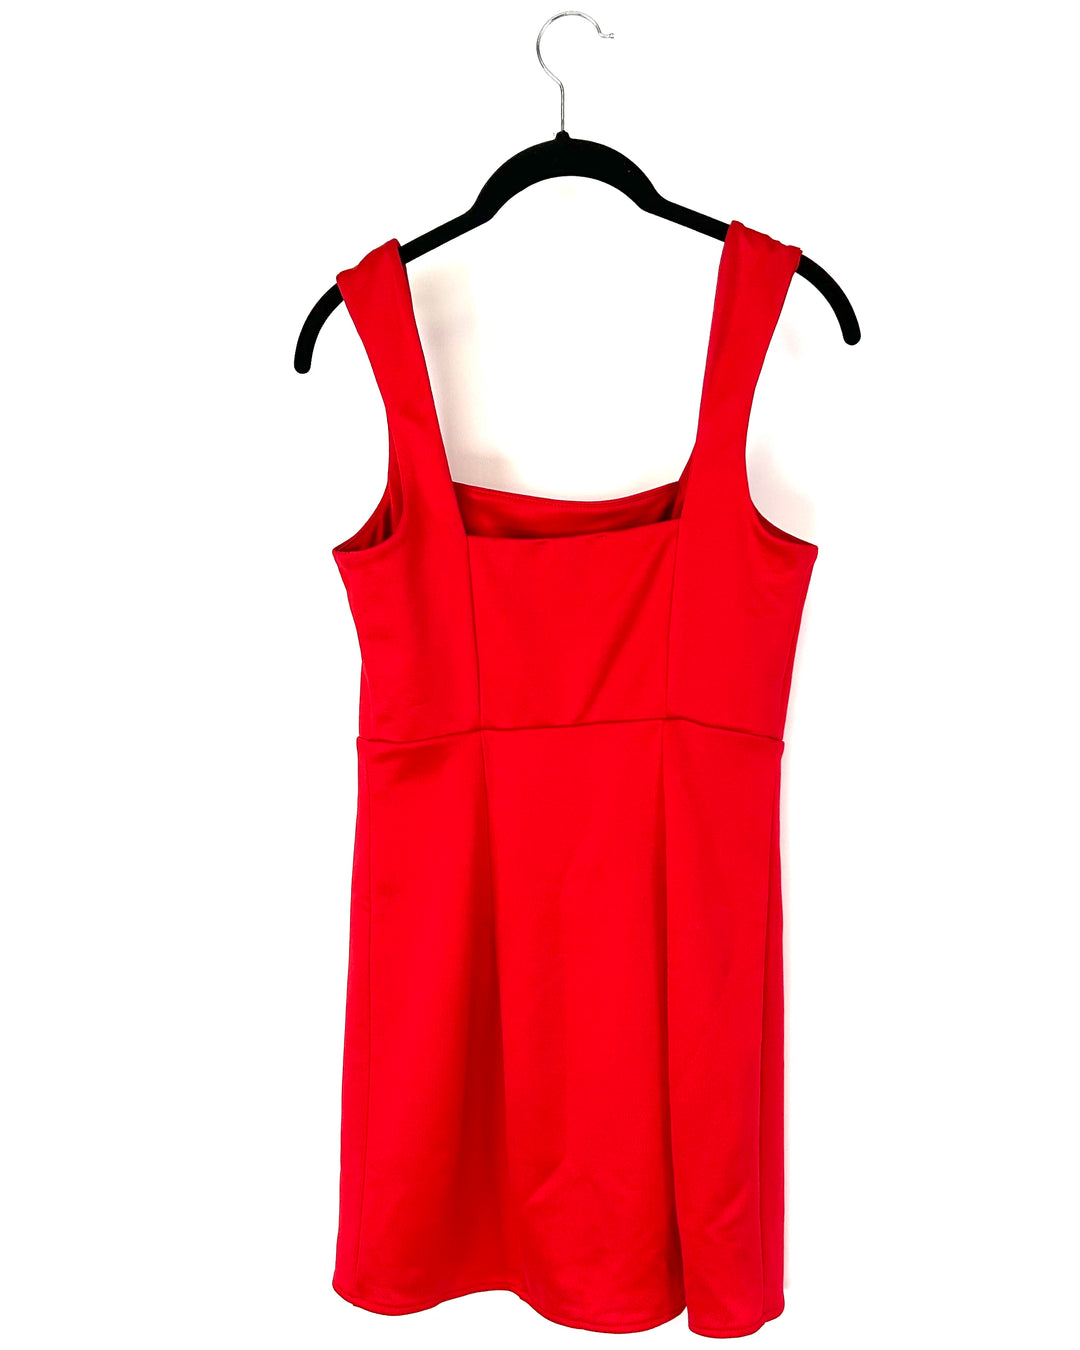 Bright Red Dress - Small